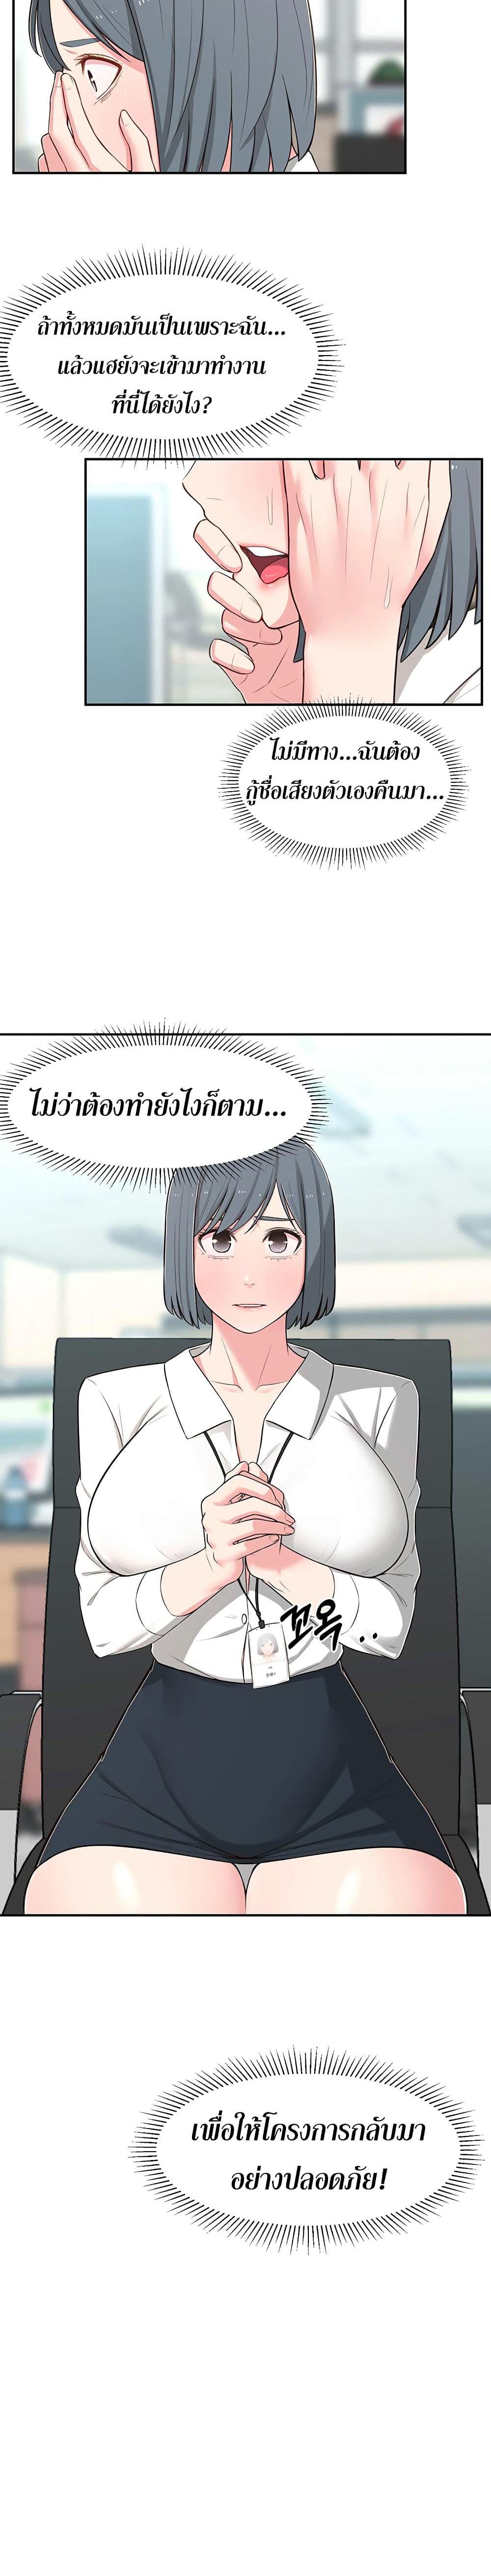 A Knowing Sister 12 ภาพ 22